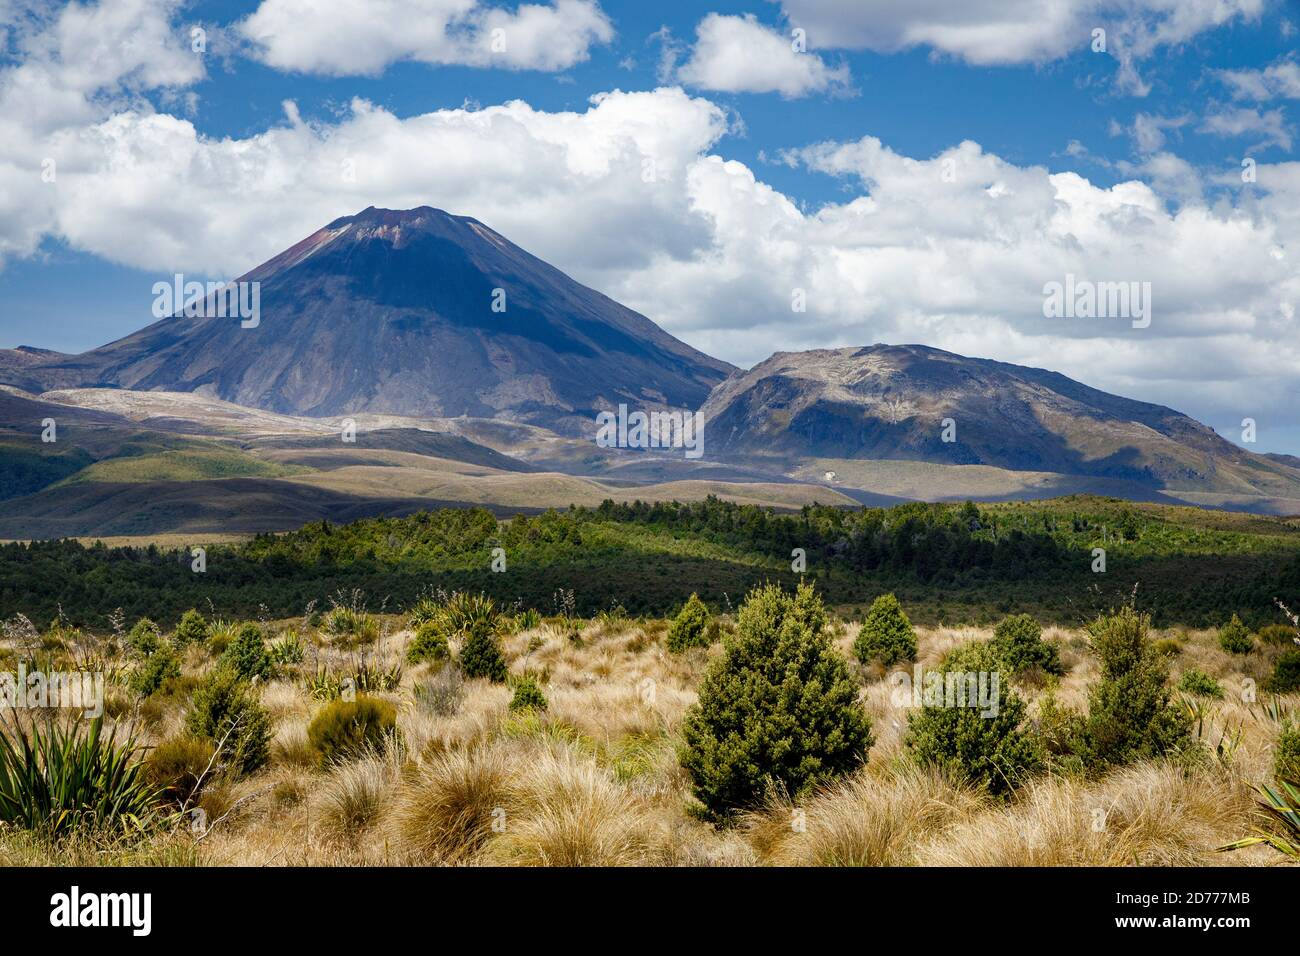 Mount Ngauruhoe, known as Mount Doom in Peter Jackson's Lord of the Rings, a stratovolcano on North Island, New Zealand. Stock Photo